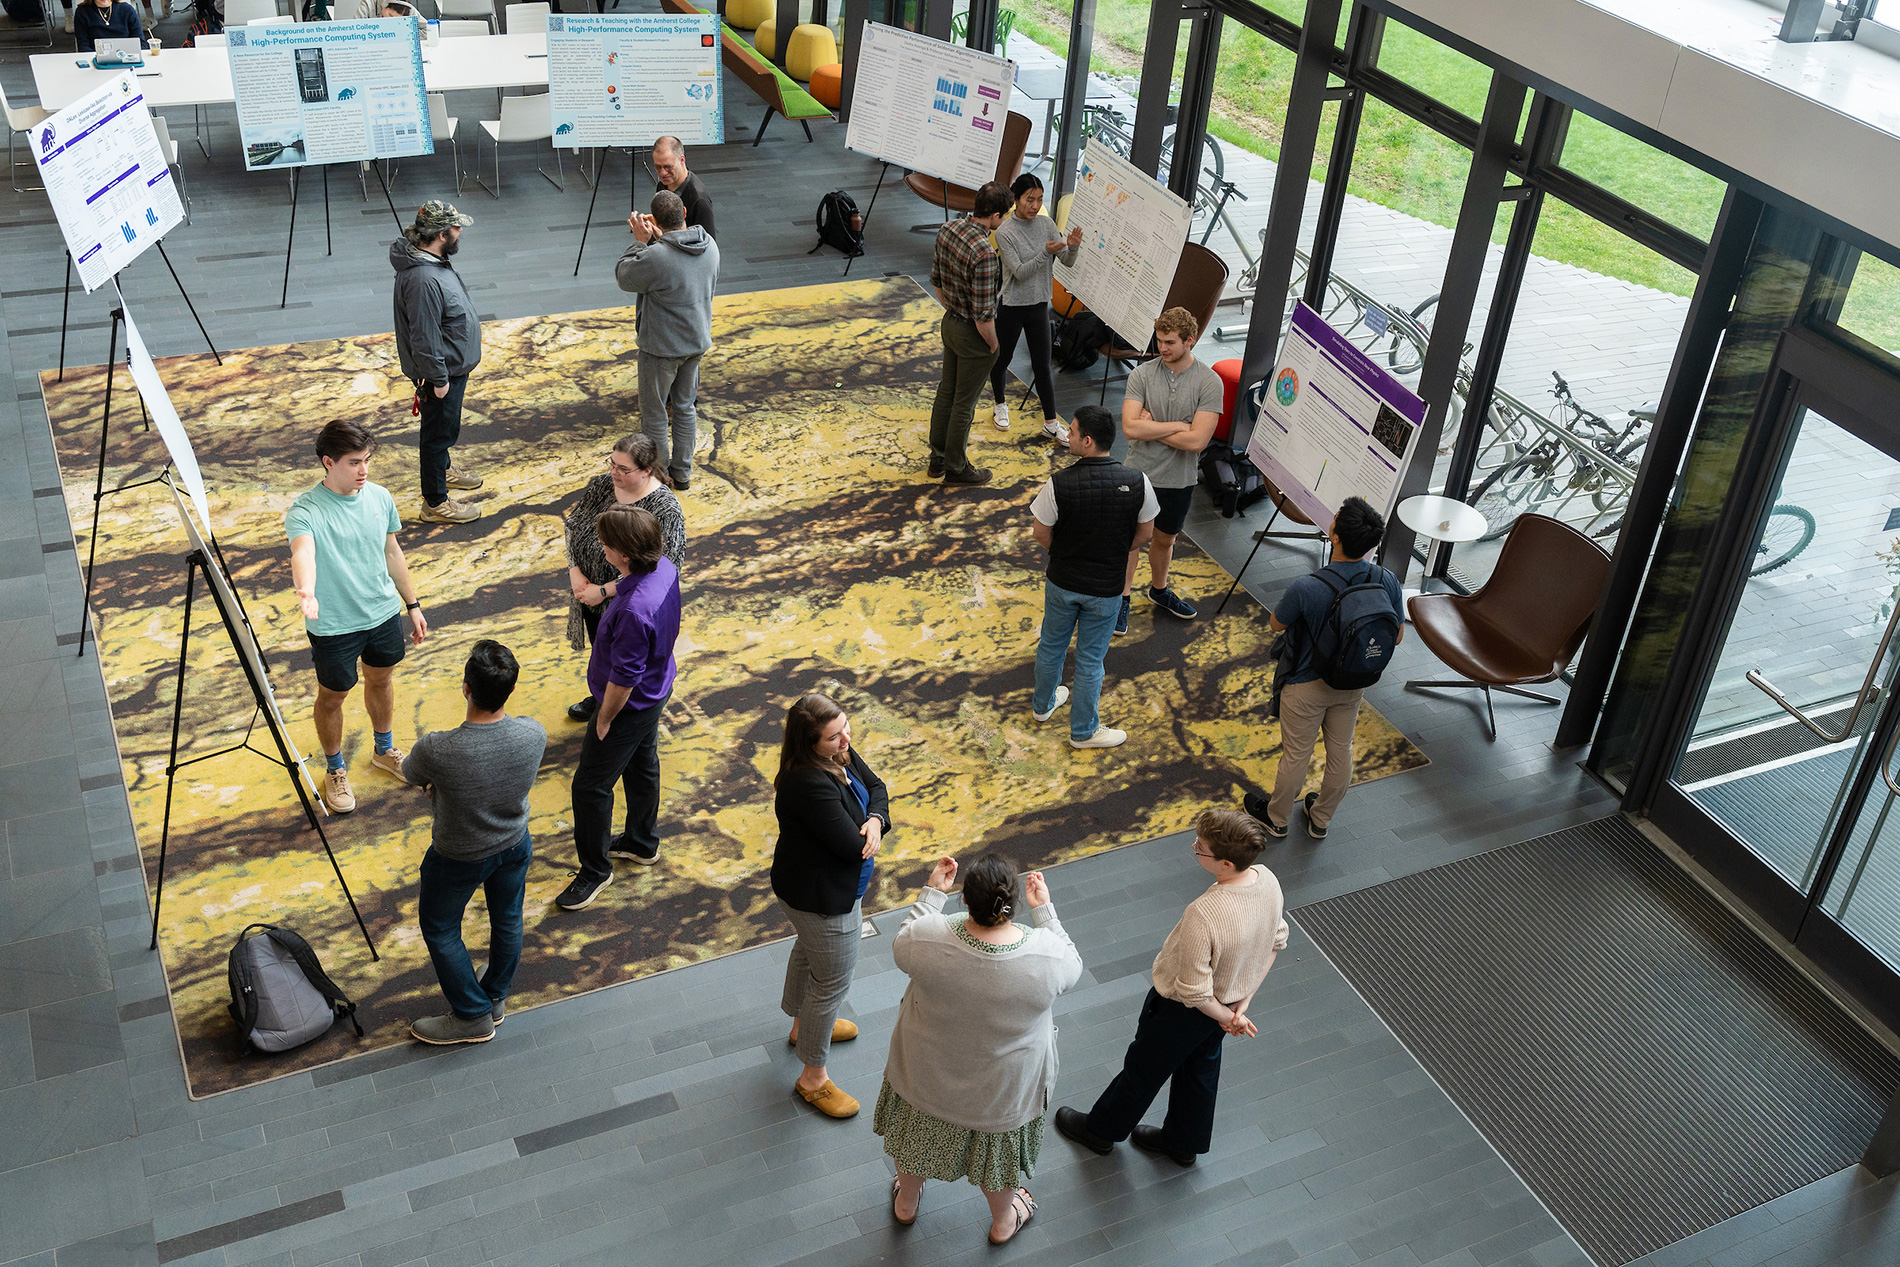 Students, faculty and staff gather in the science center at Amherst College.